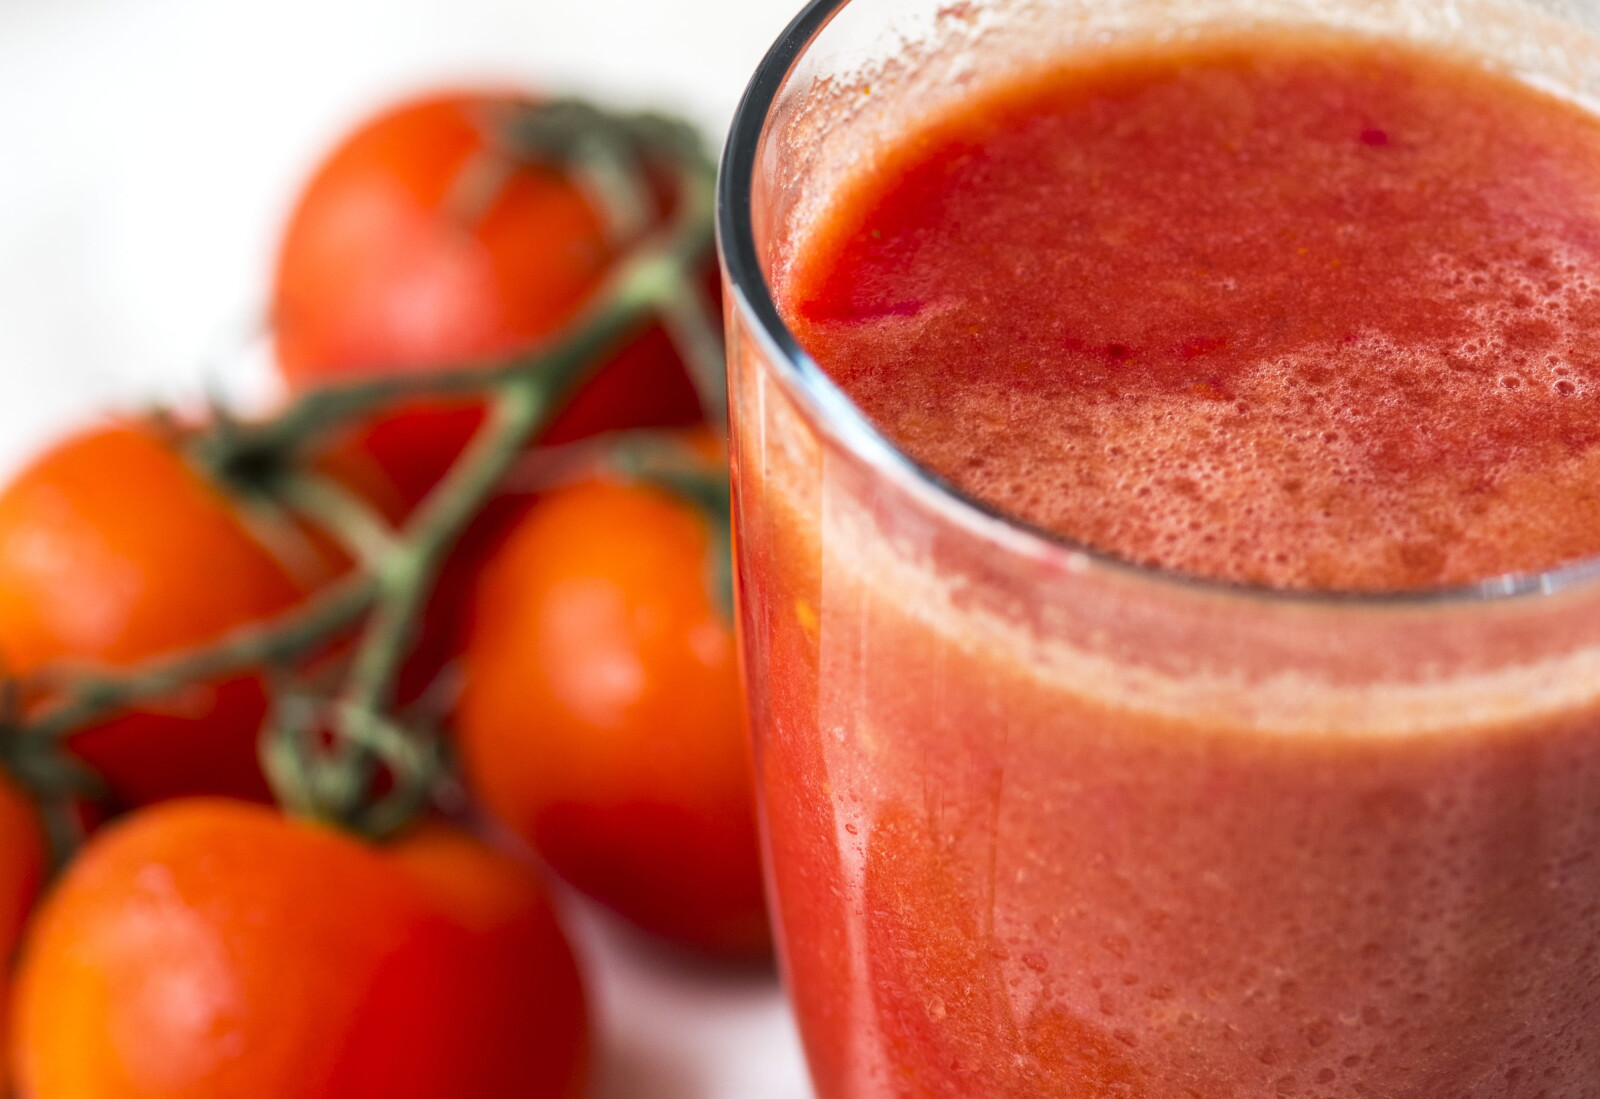 a close photo of a cup of red juice and some blurred tomatoes 